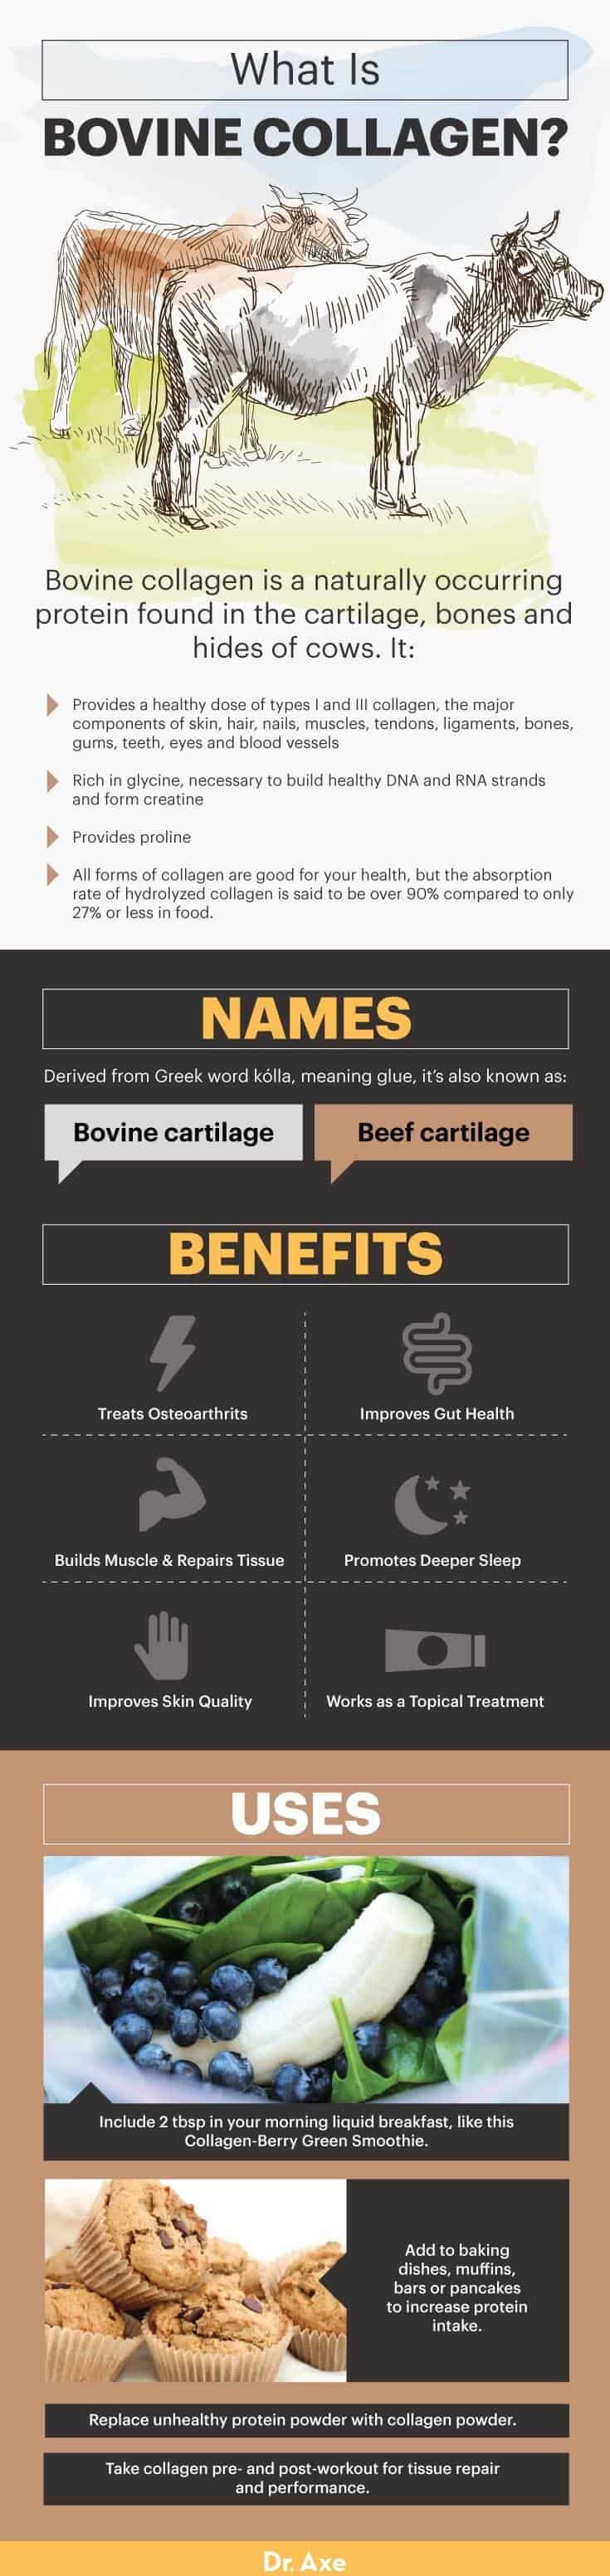 What is bovine collagen? - Dr. Axe